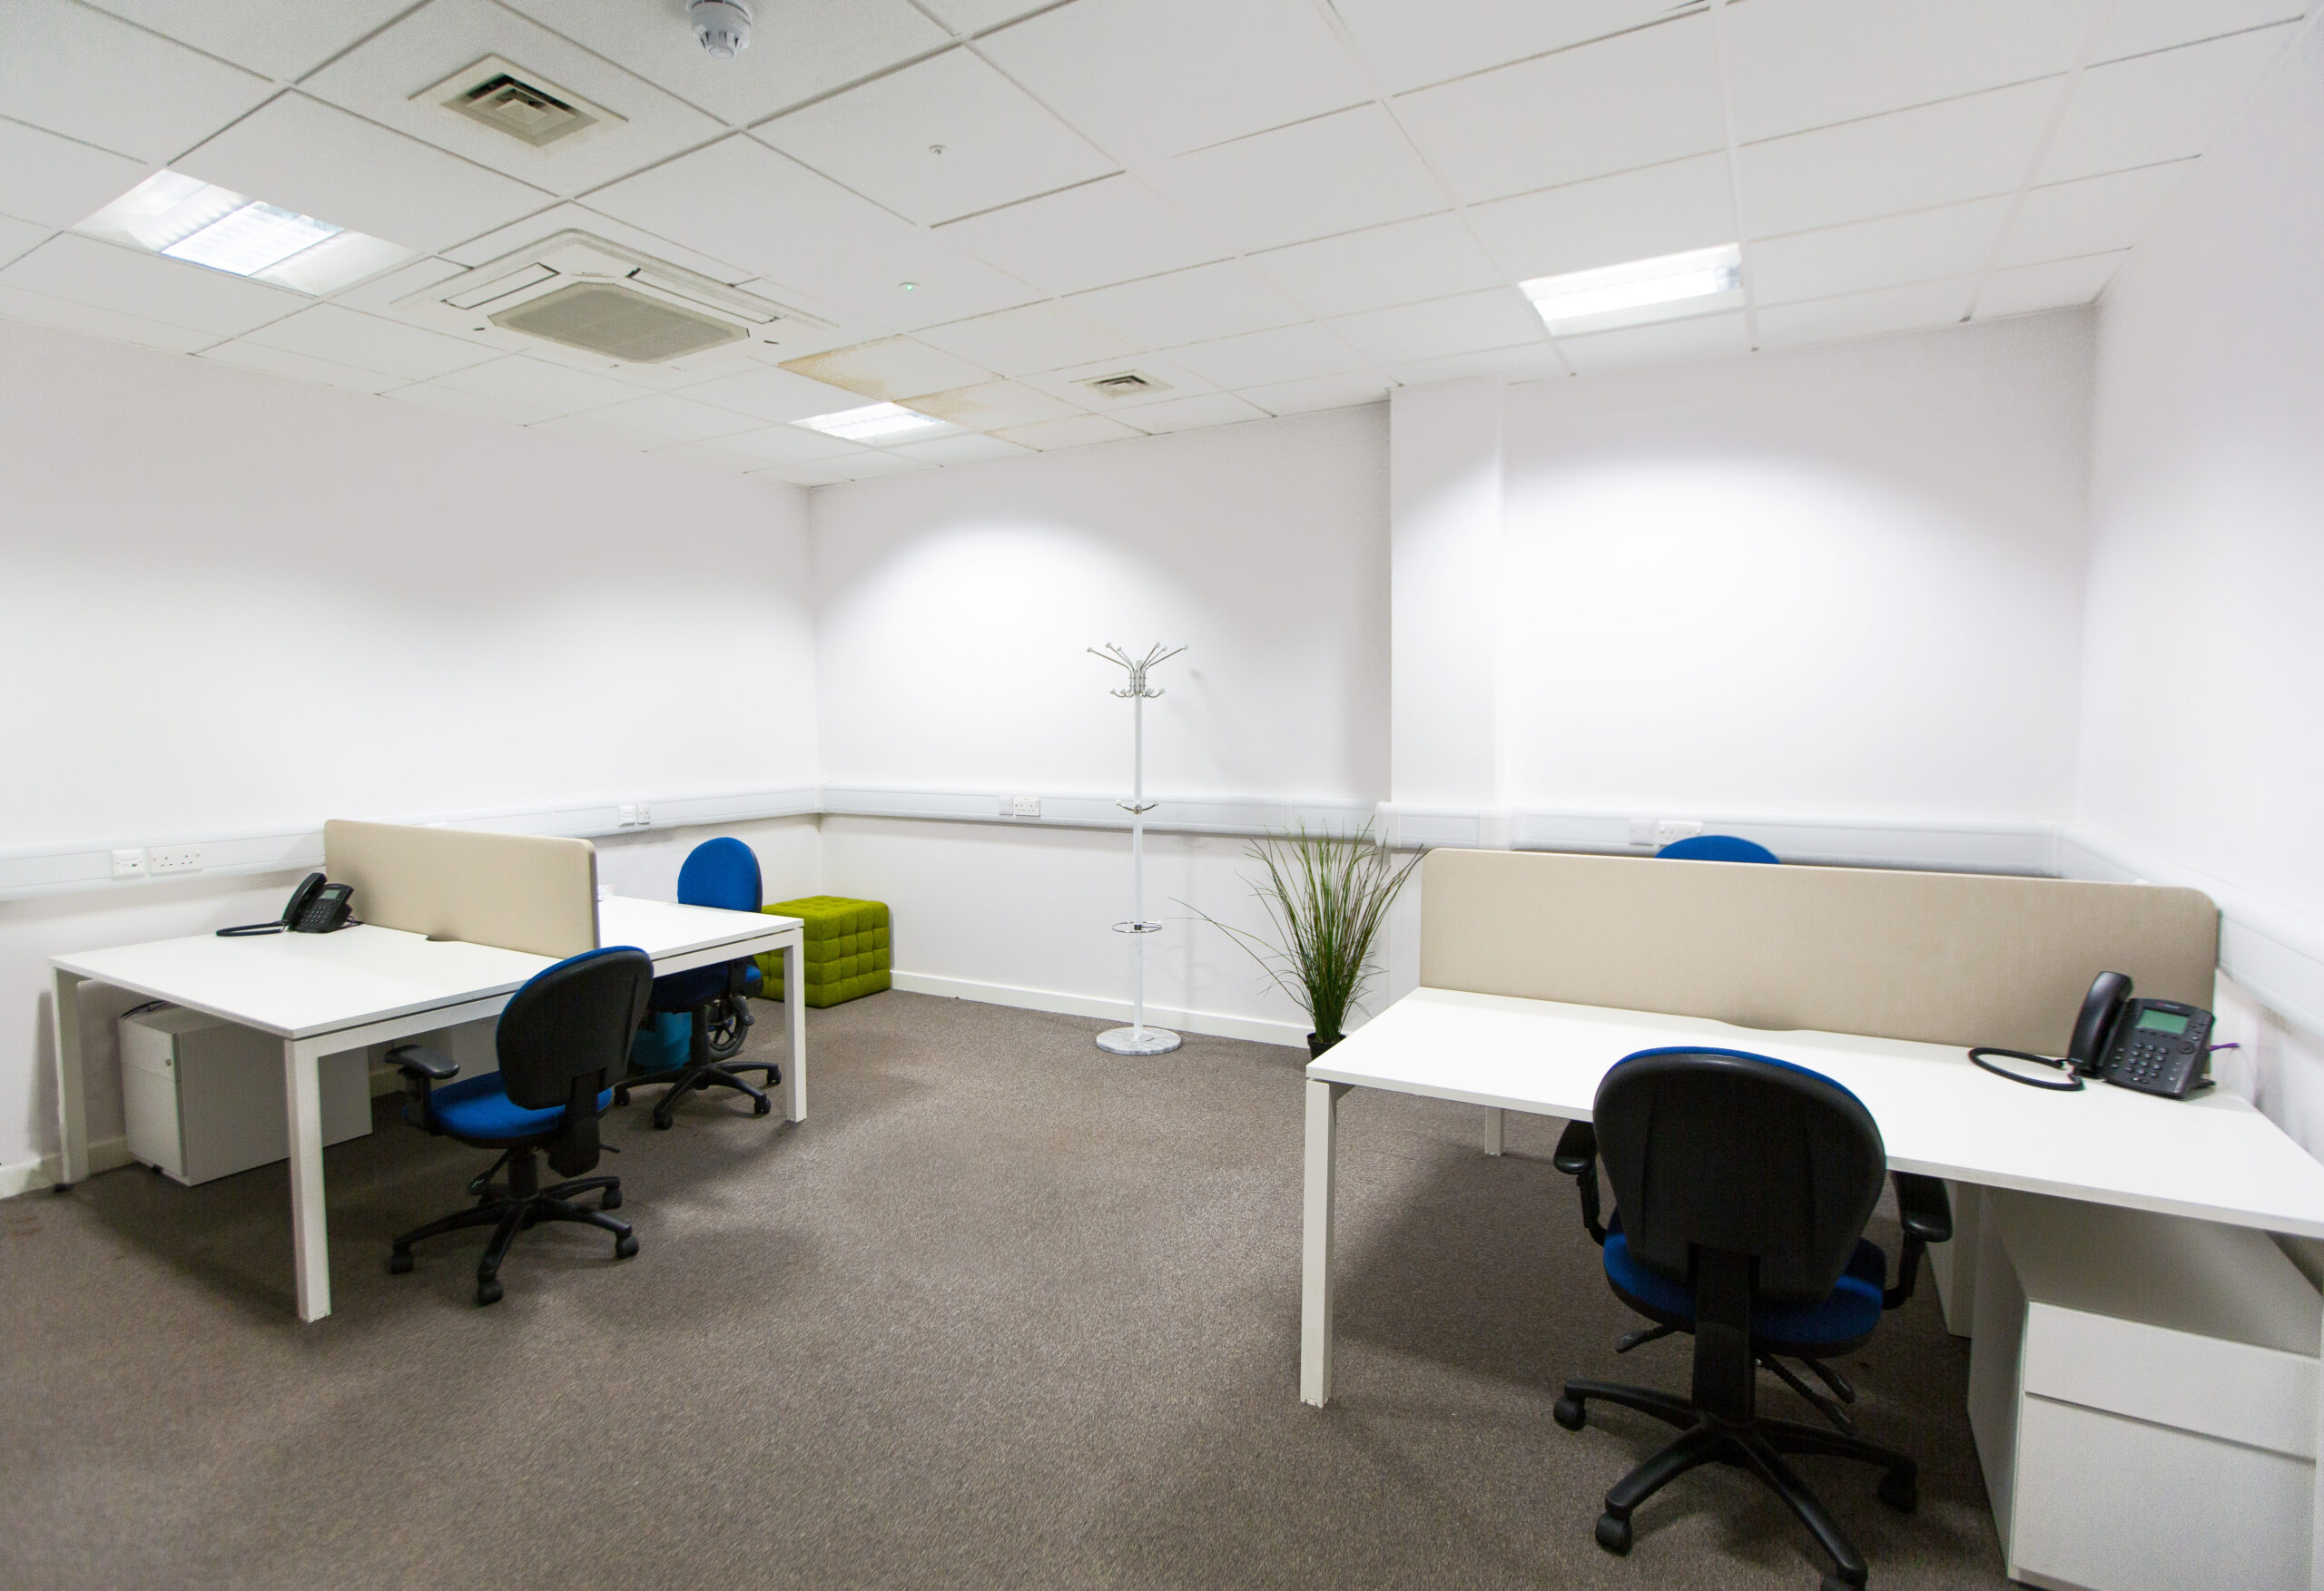 Ground floor office at our Peterborough Future Business Centre